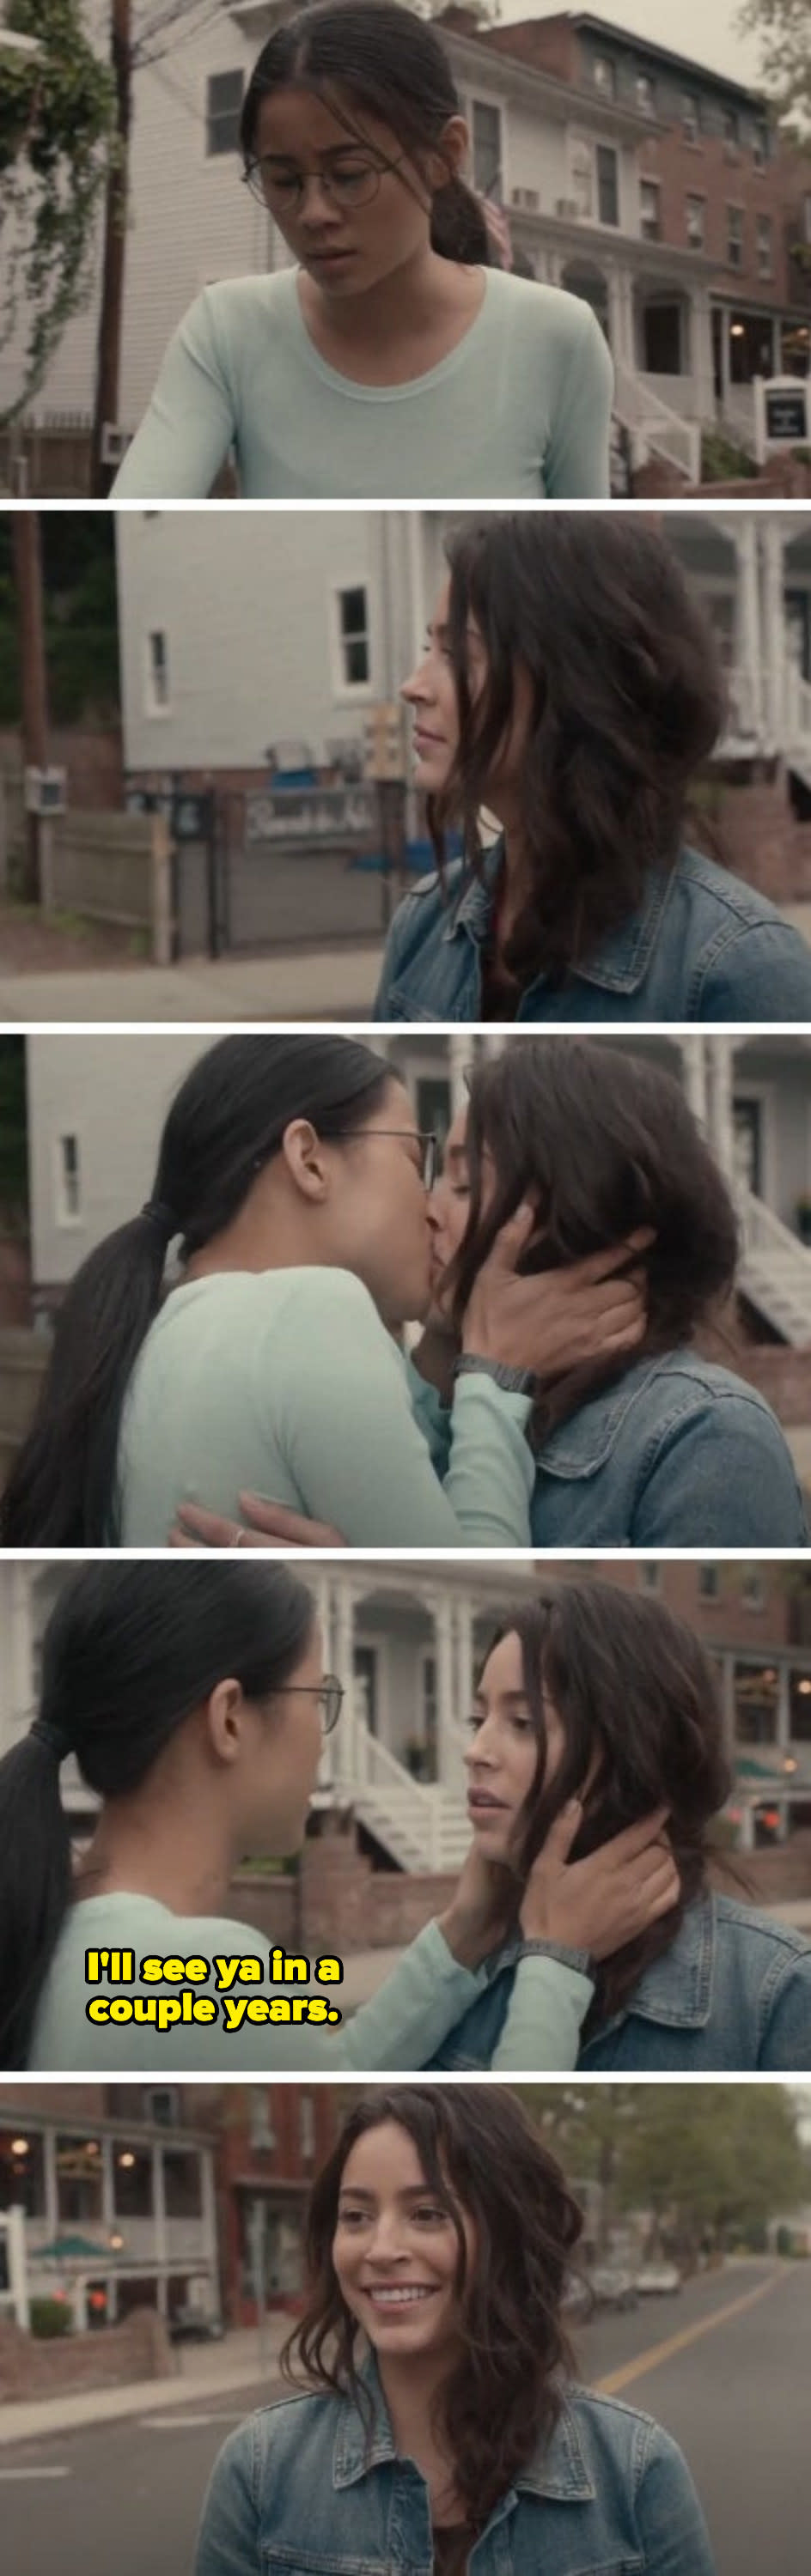 Ellie kissing Aster in the middle of the street